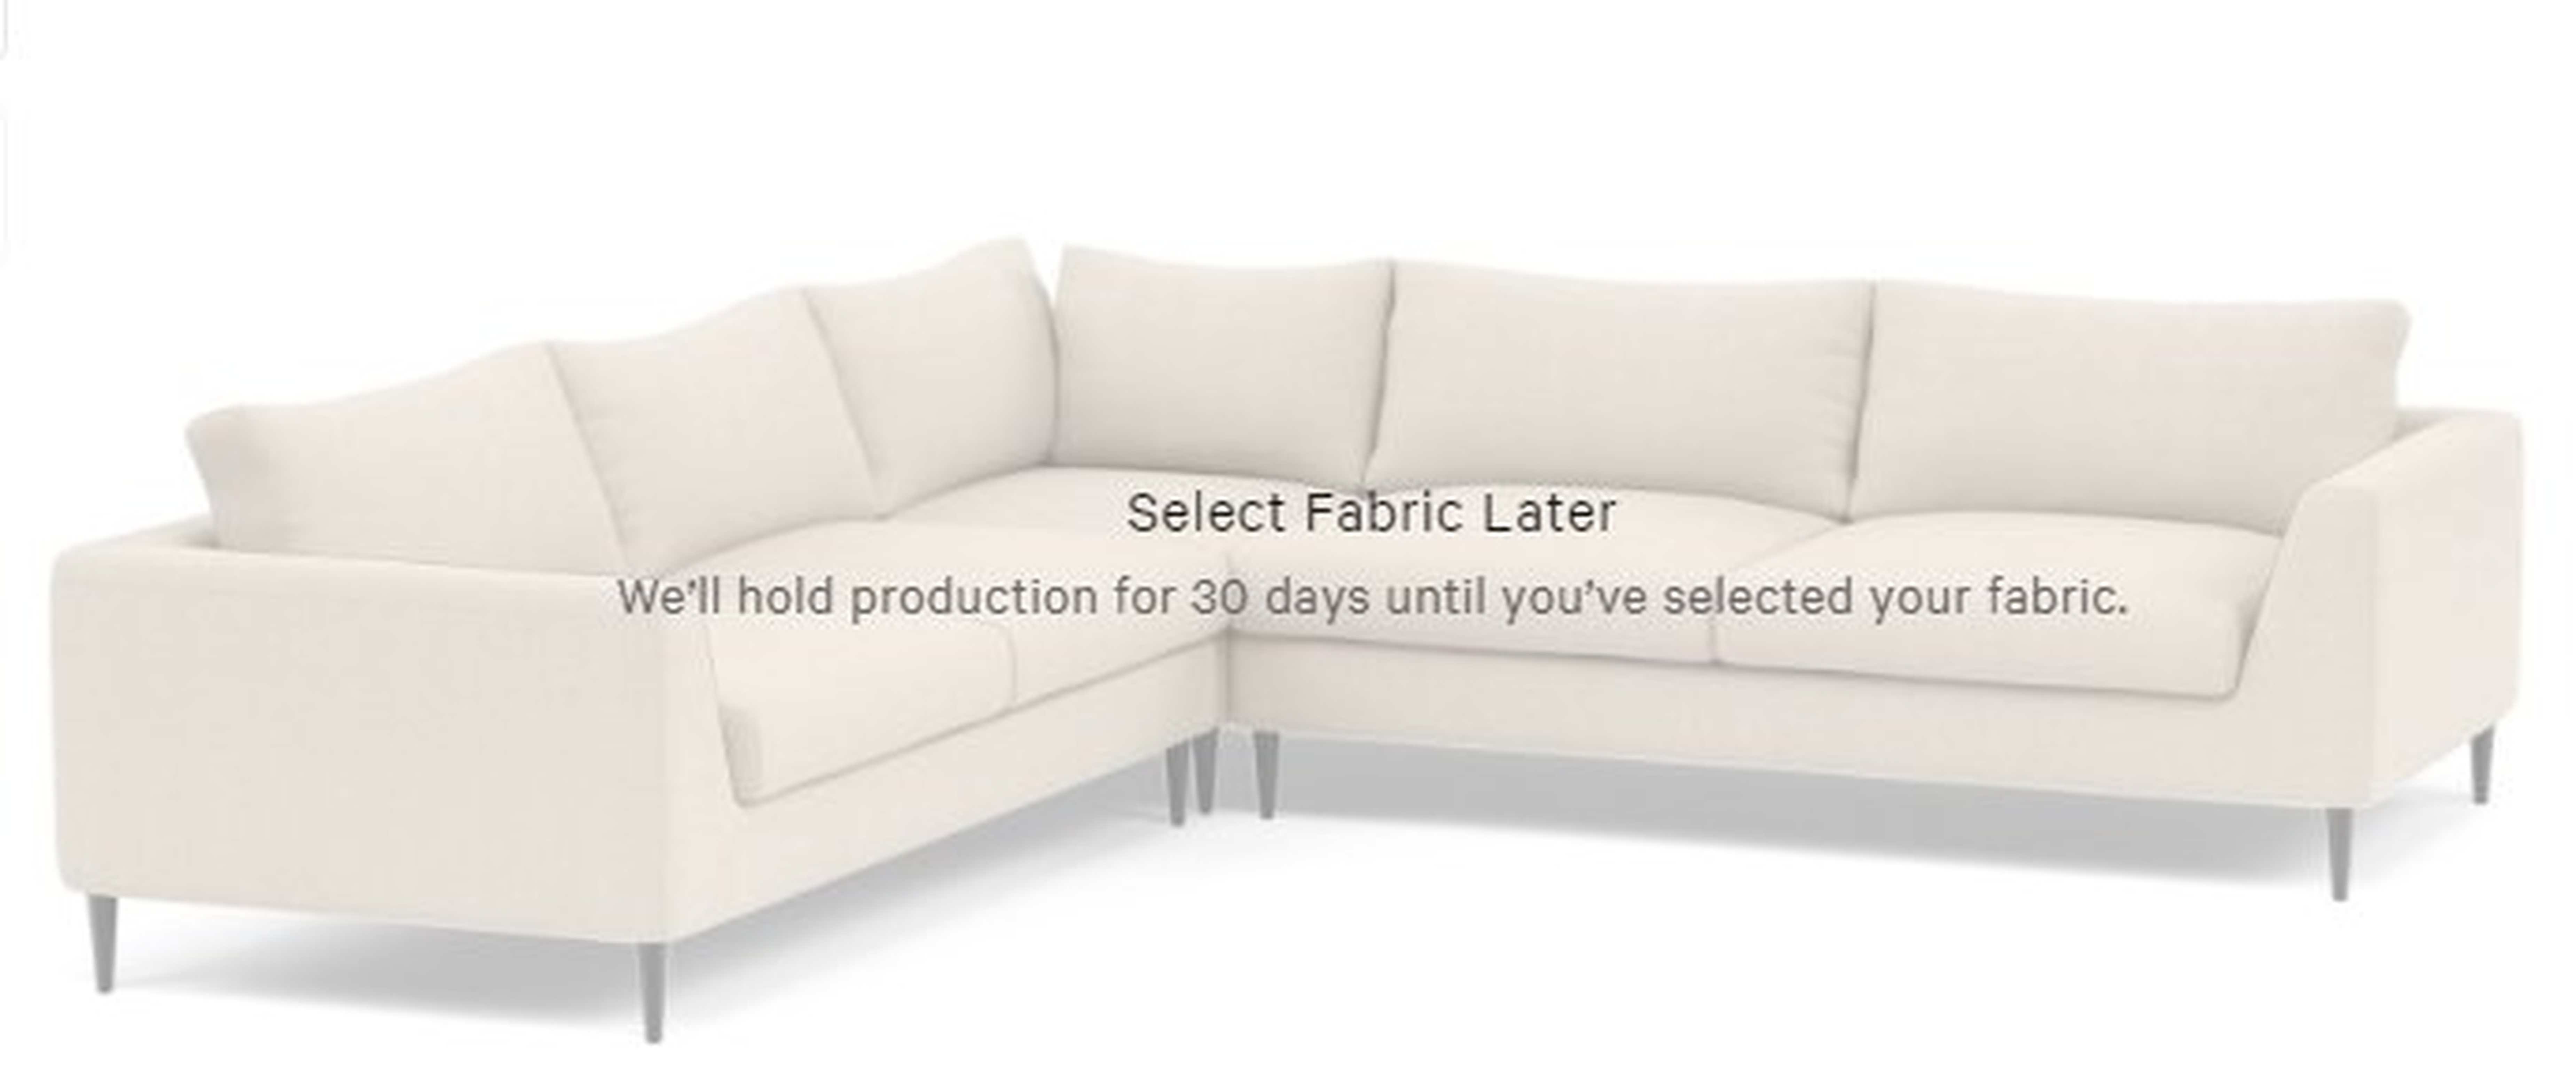 ASHER Corner Sectional Sofa - 98"x98" - Decide Later fabric/Unfinished GunMetal Tapered Round Metal leg - Interior Define